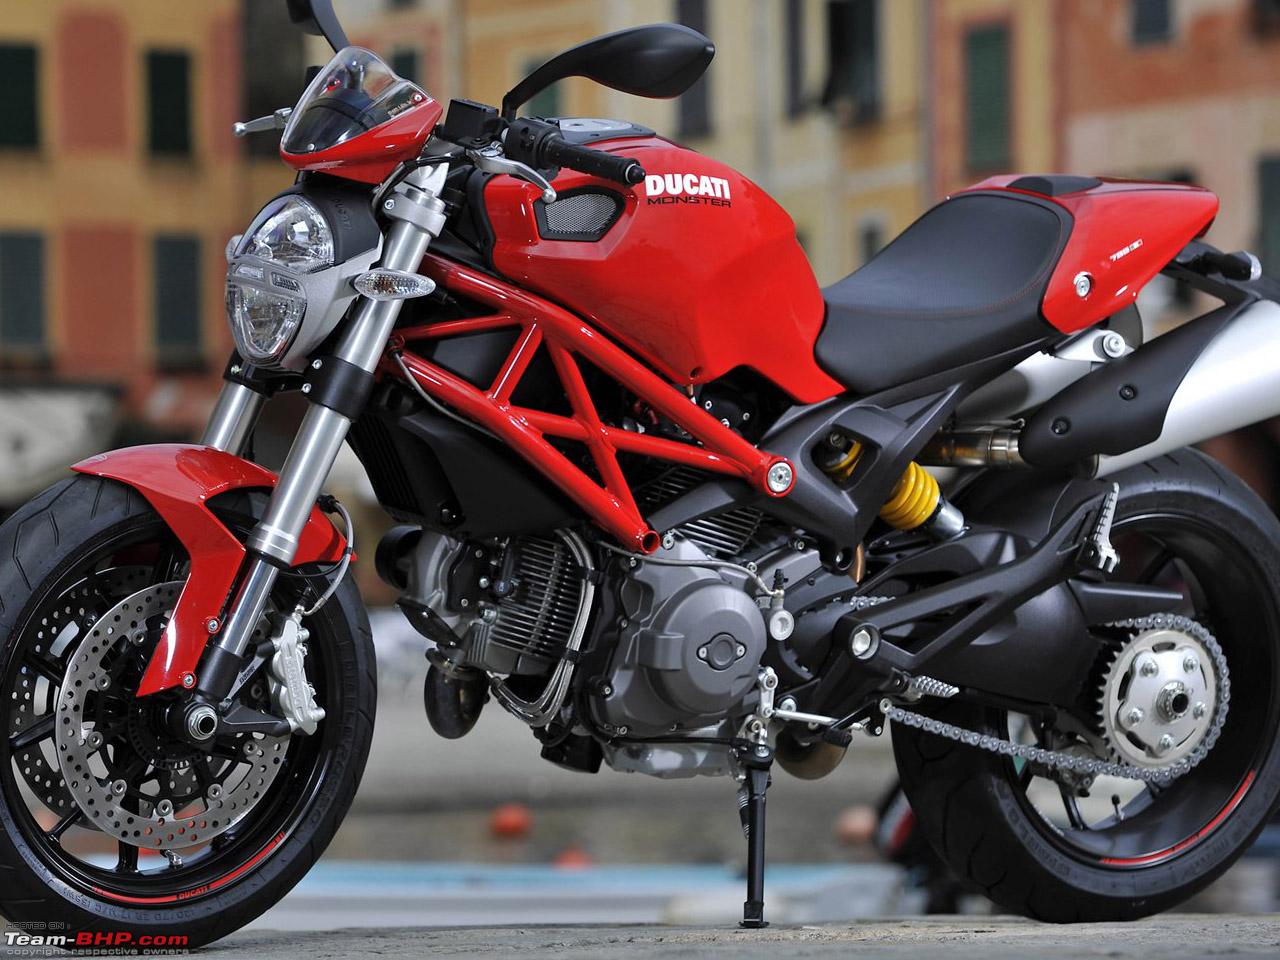 Impulsive Buying: Booked The Ducati Monster 796 - RED!!! - Team-BHP